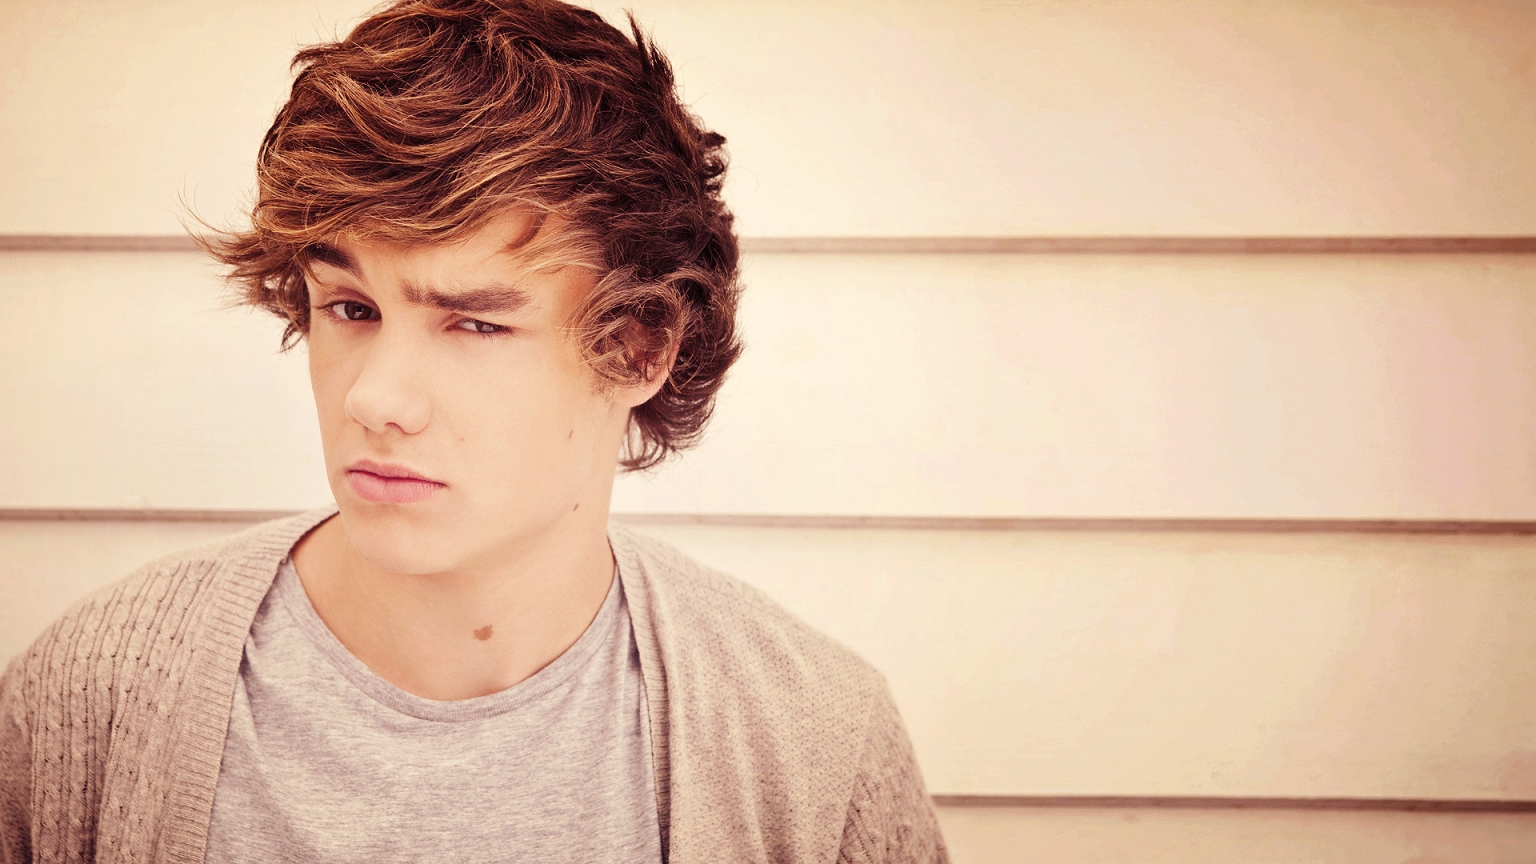 Liam Payne Look for 1536 x 864 HDTV resolution